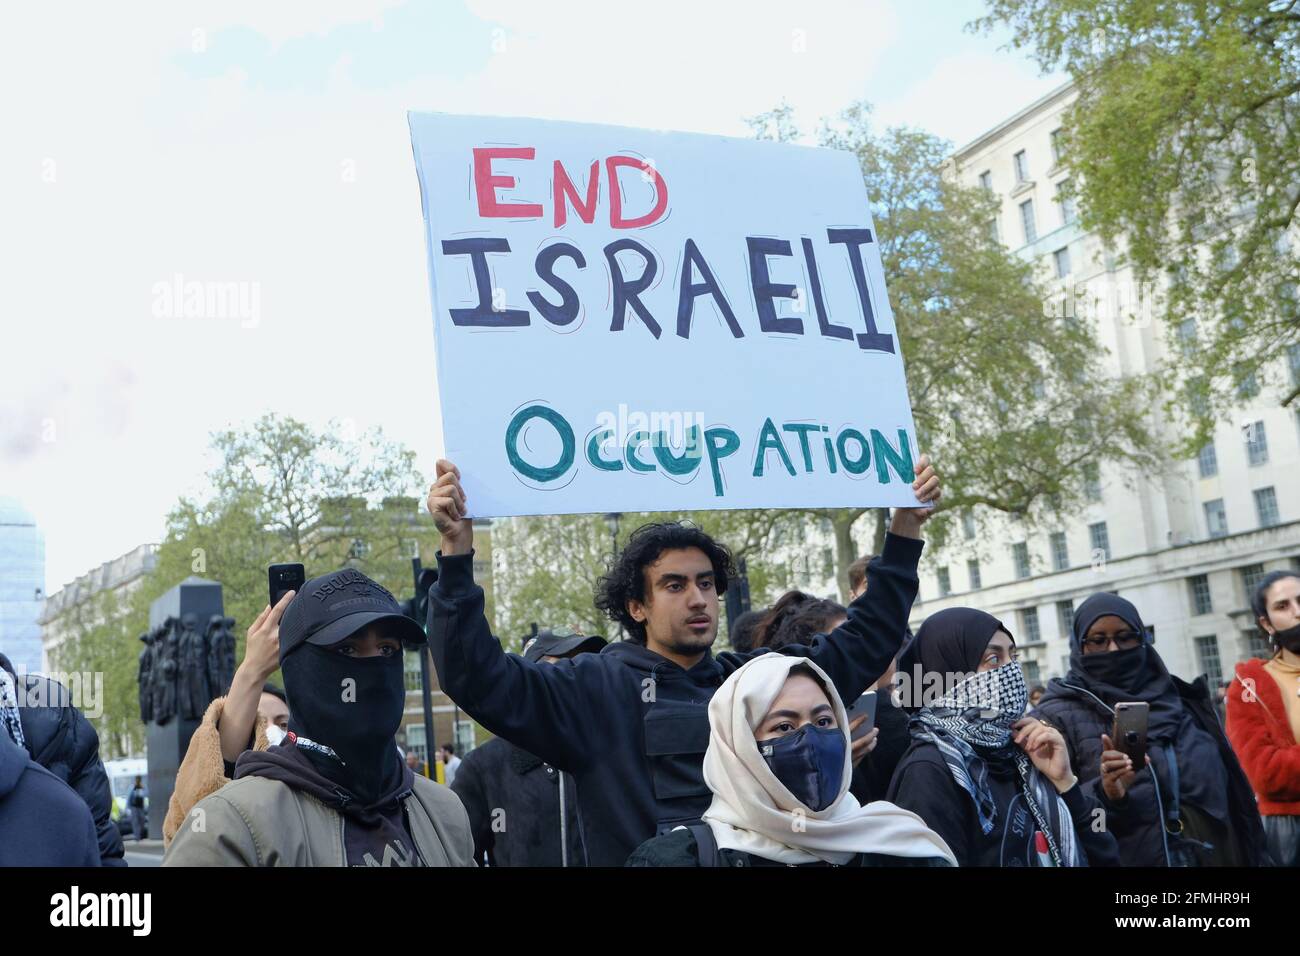 A protester holds up a placard 'End Israeli Occupation' at a demonstration against forced evictions of Palestinian families in Jerusalem Stock Photo